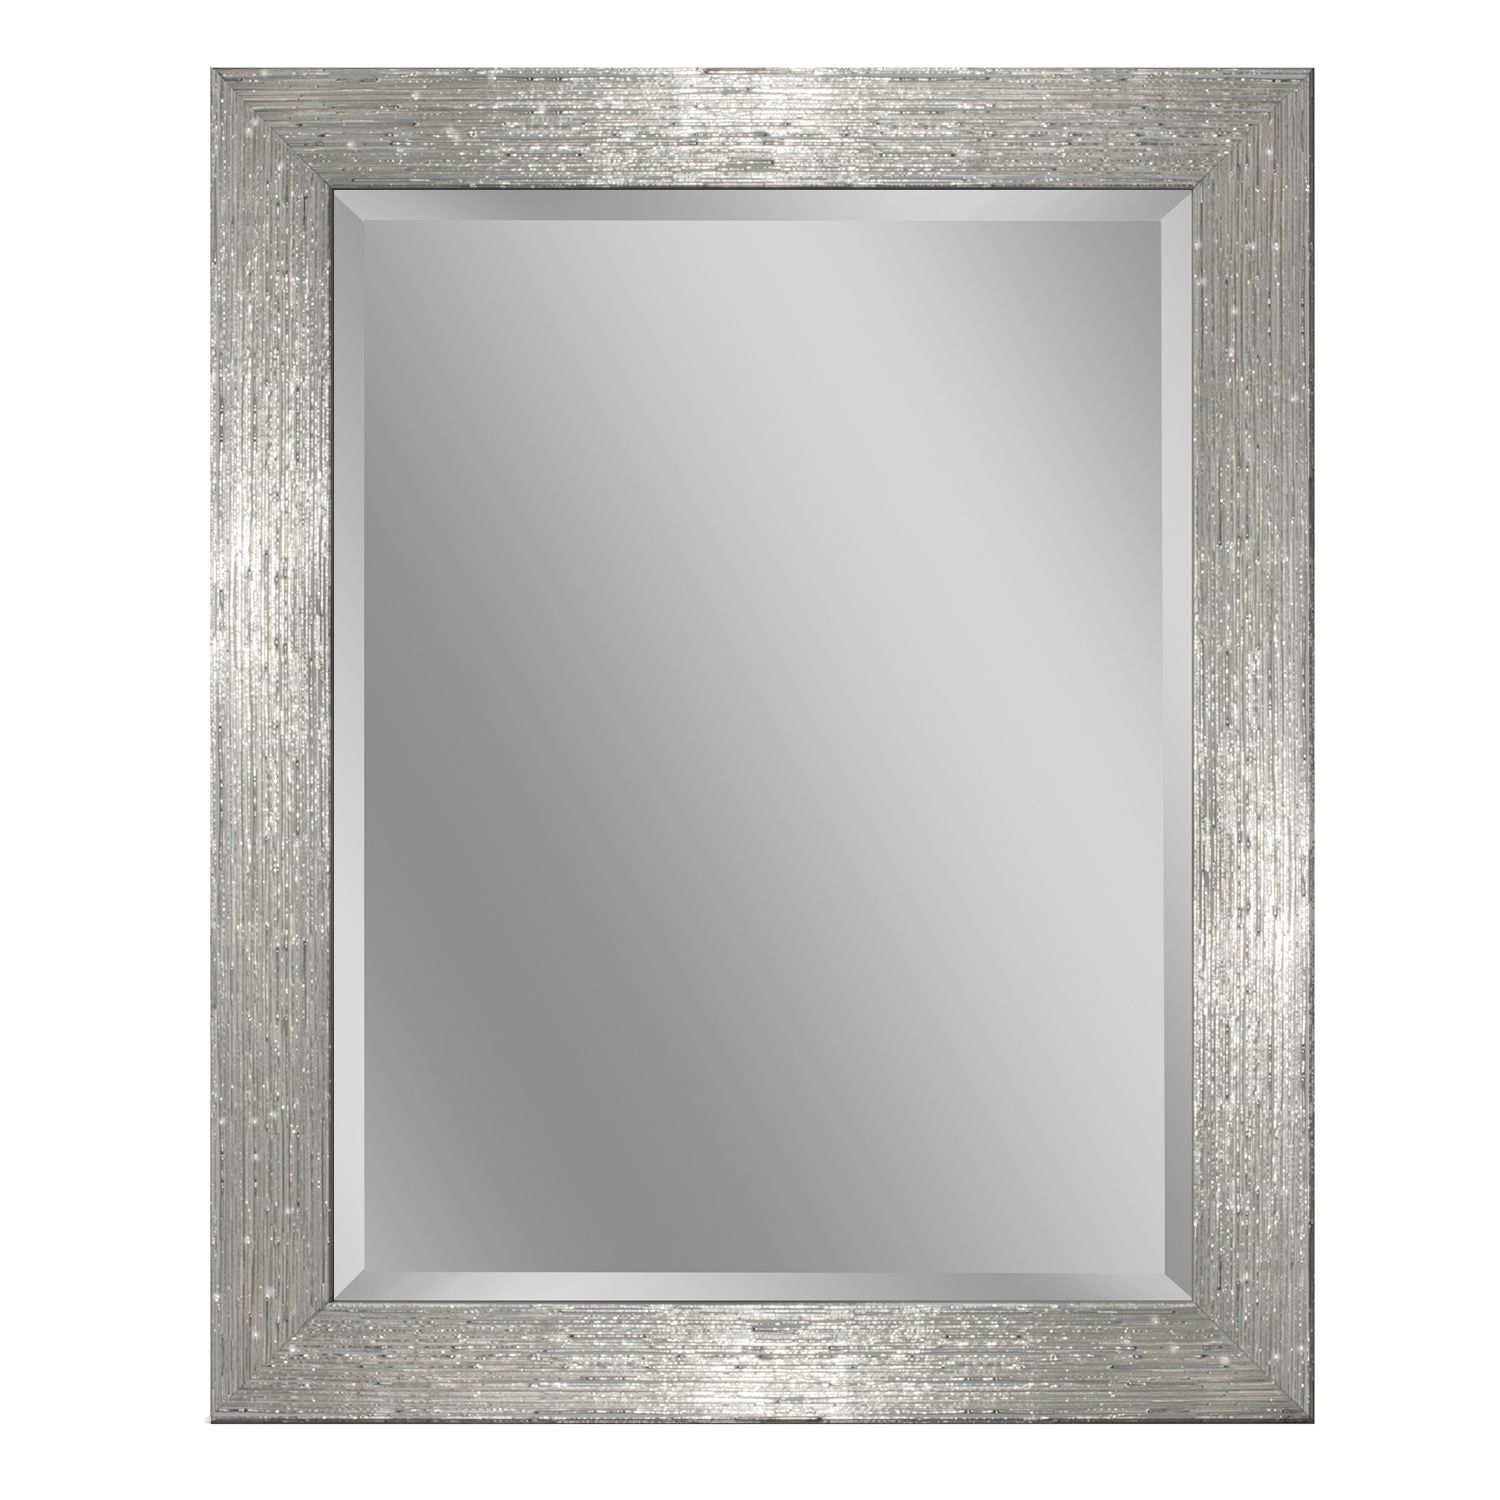 Image for Head West Distressed Wall Mirror at Kohl's.